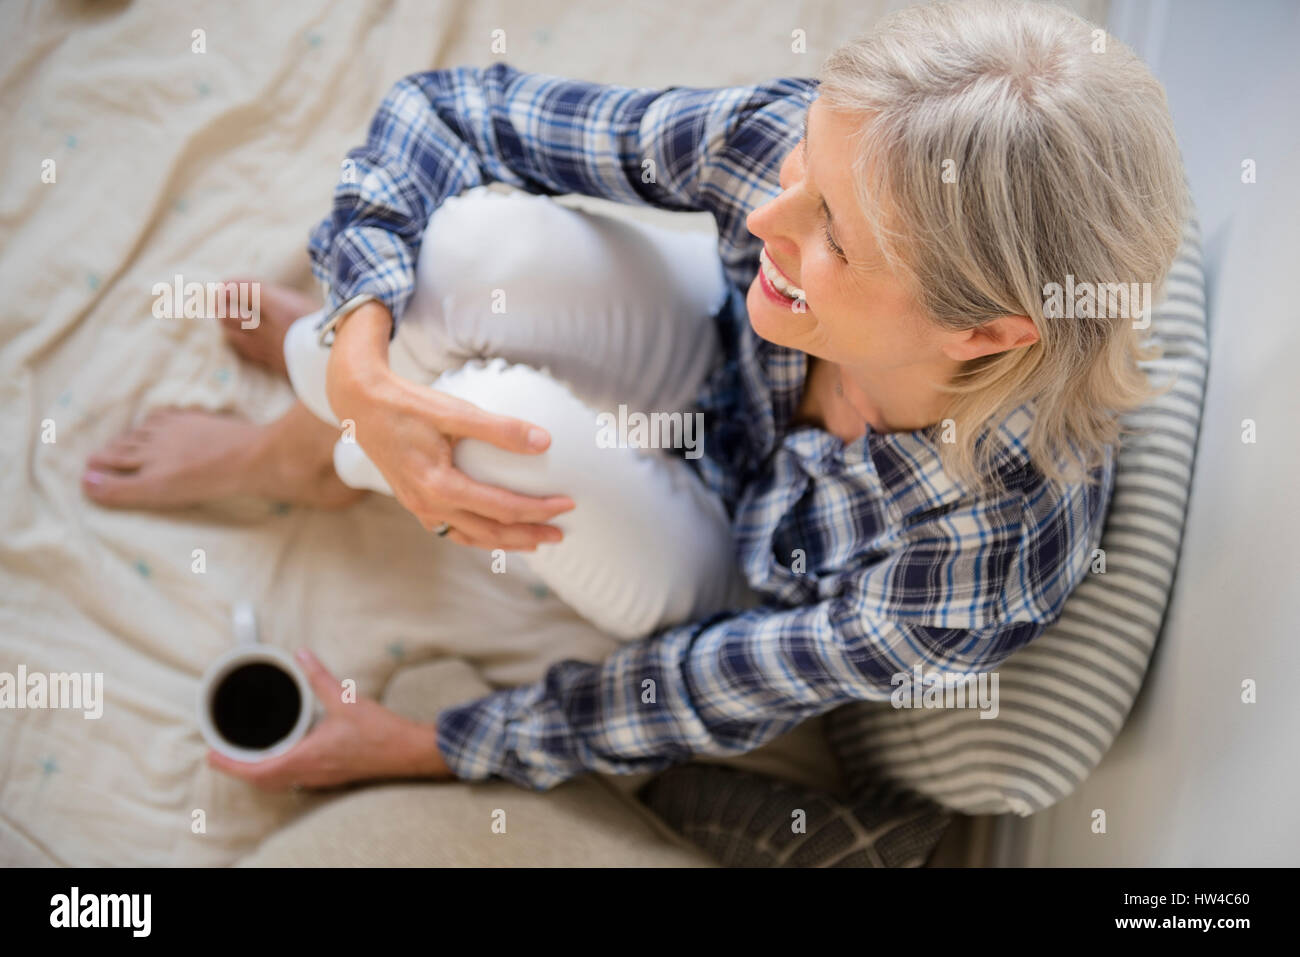 Caucasian woman drinking coffee Banque D'Images